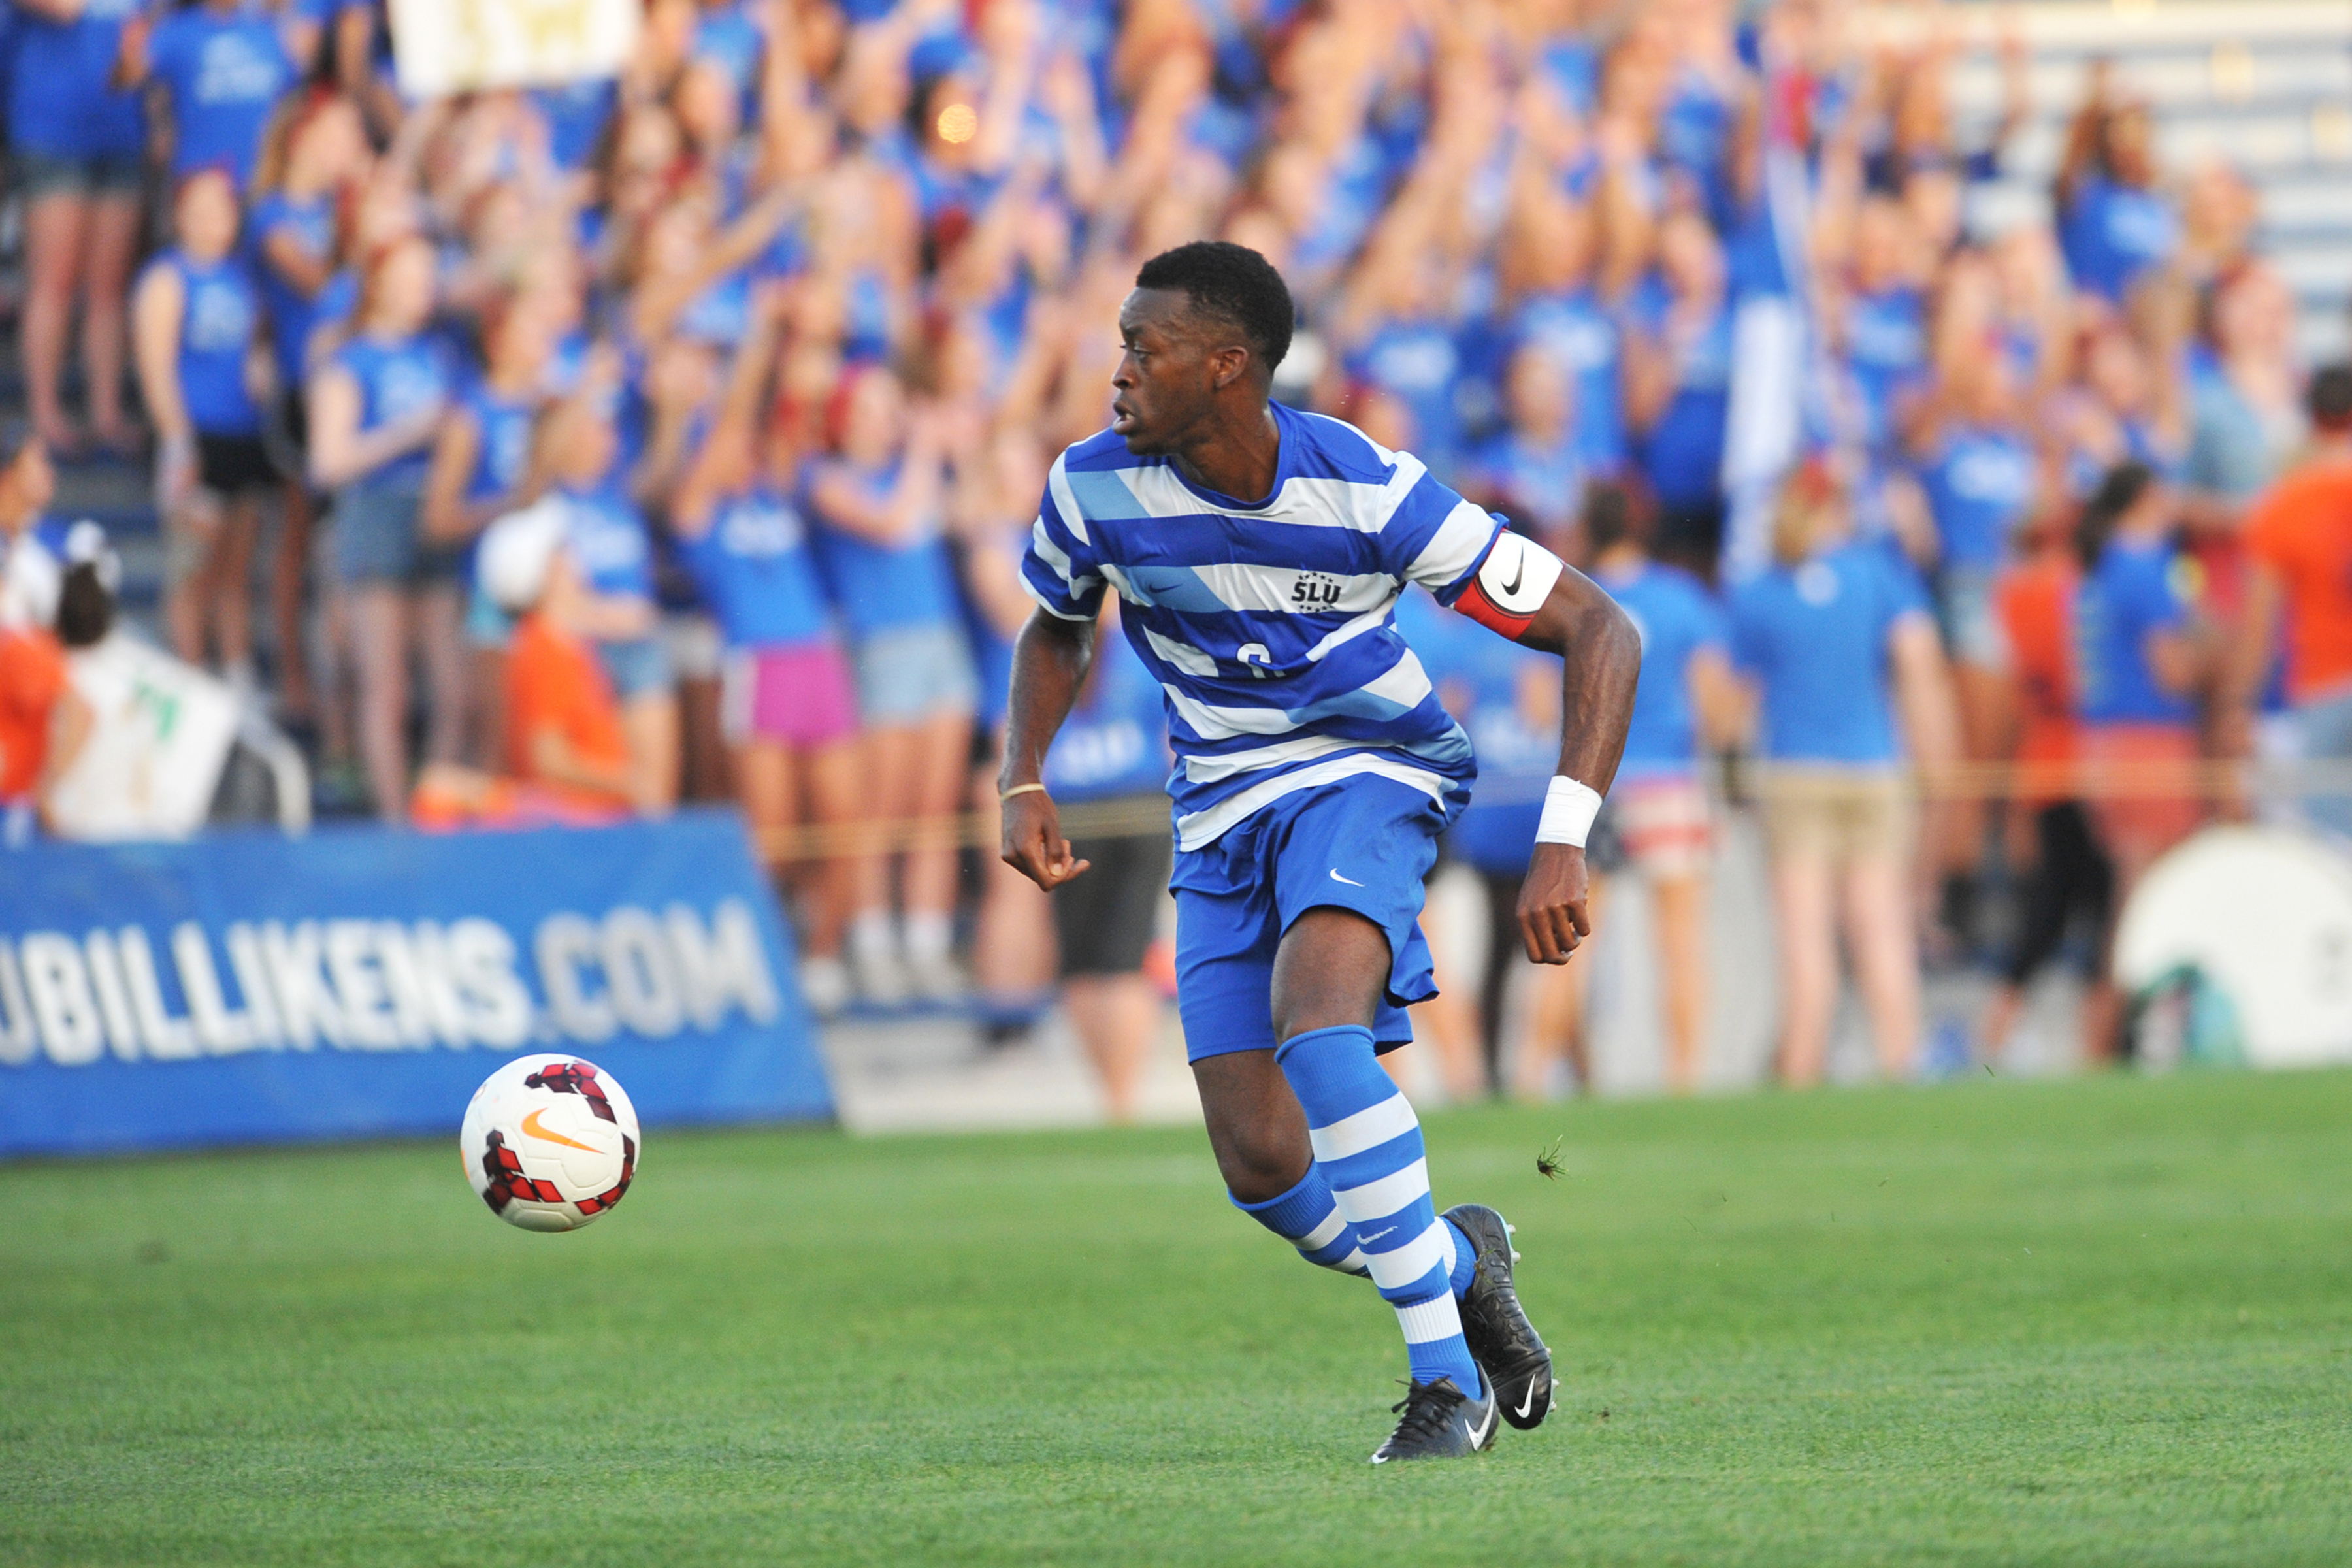 Billiken Fall ID Camp - SOLD OUT event image